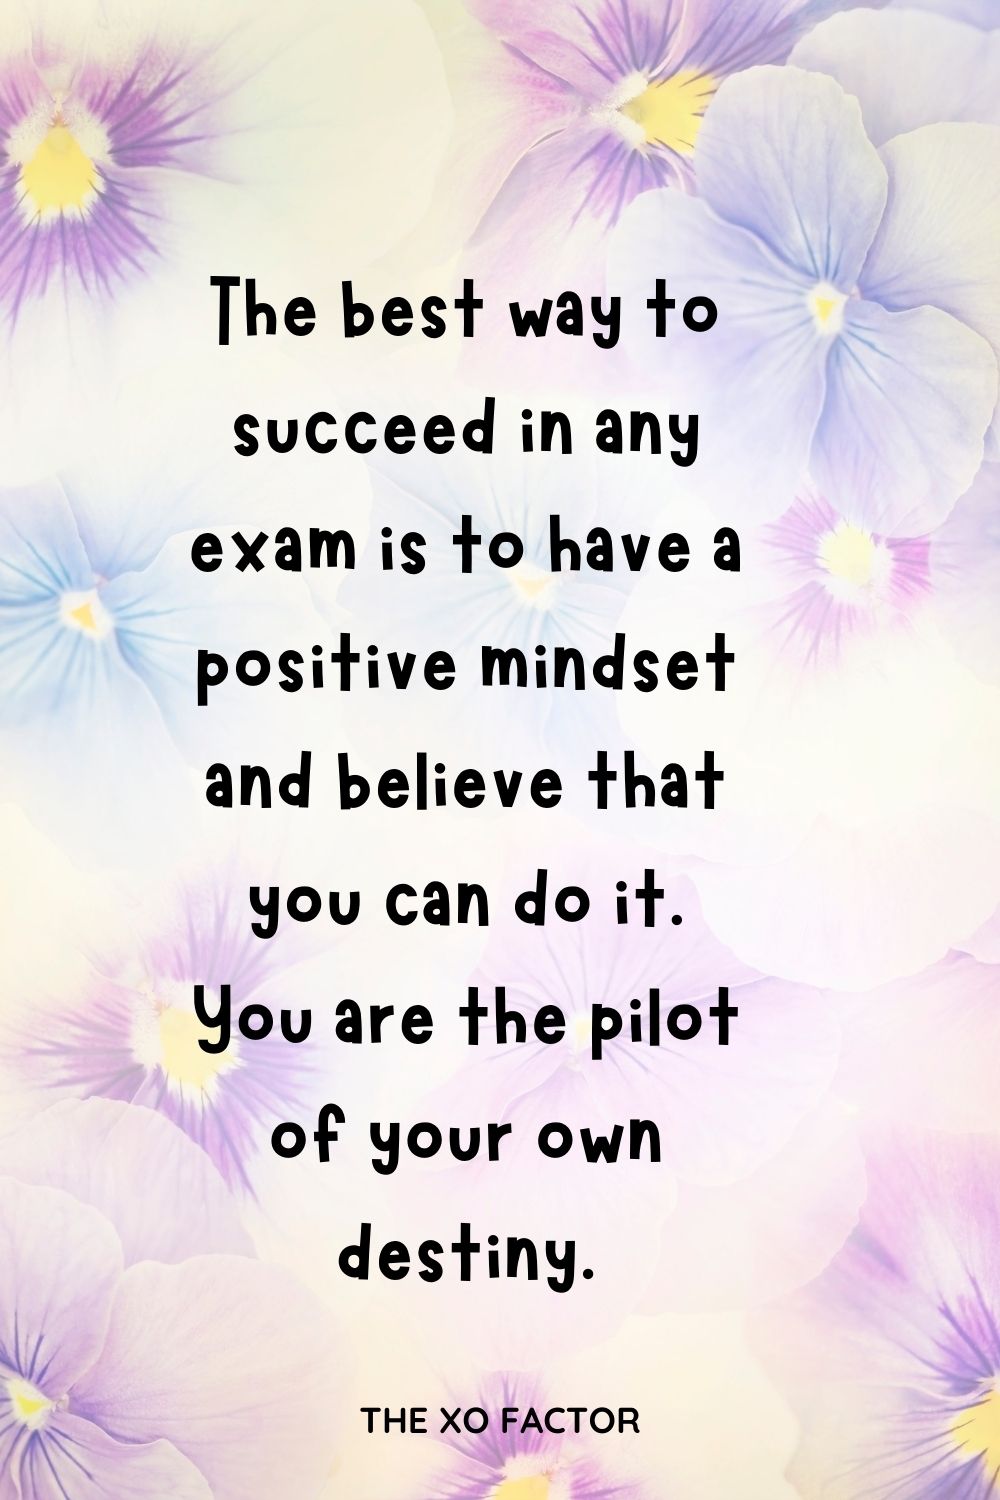 The best way to succeed in any exam is to have a positive mindset and believe that you can do it. You are the pilot of your own destiny.